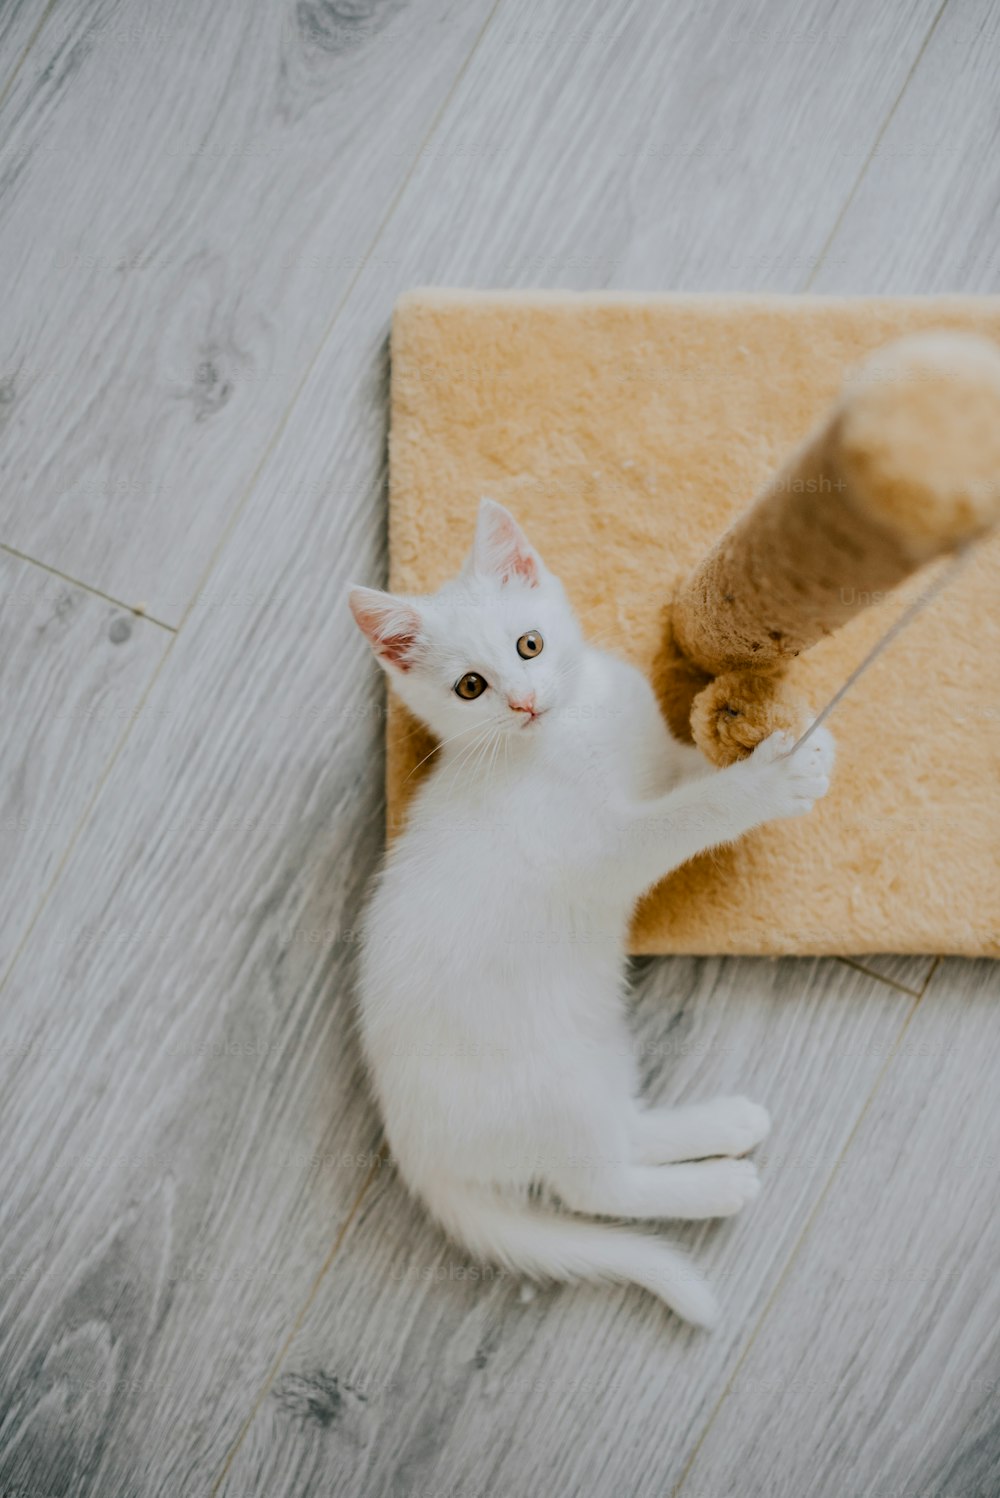 a white kitten playing with a wooden toy